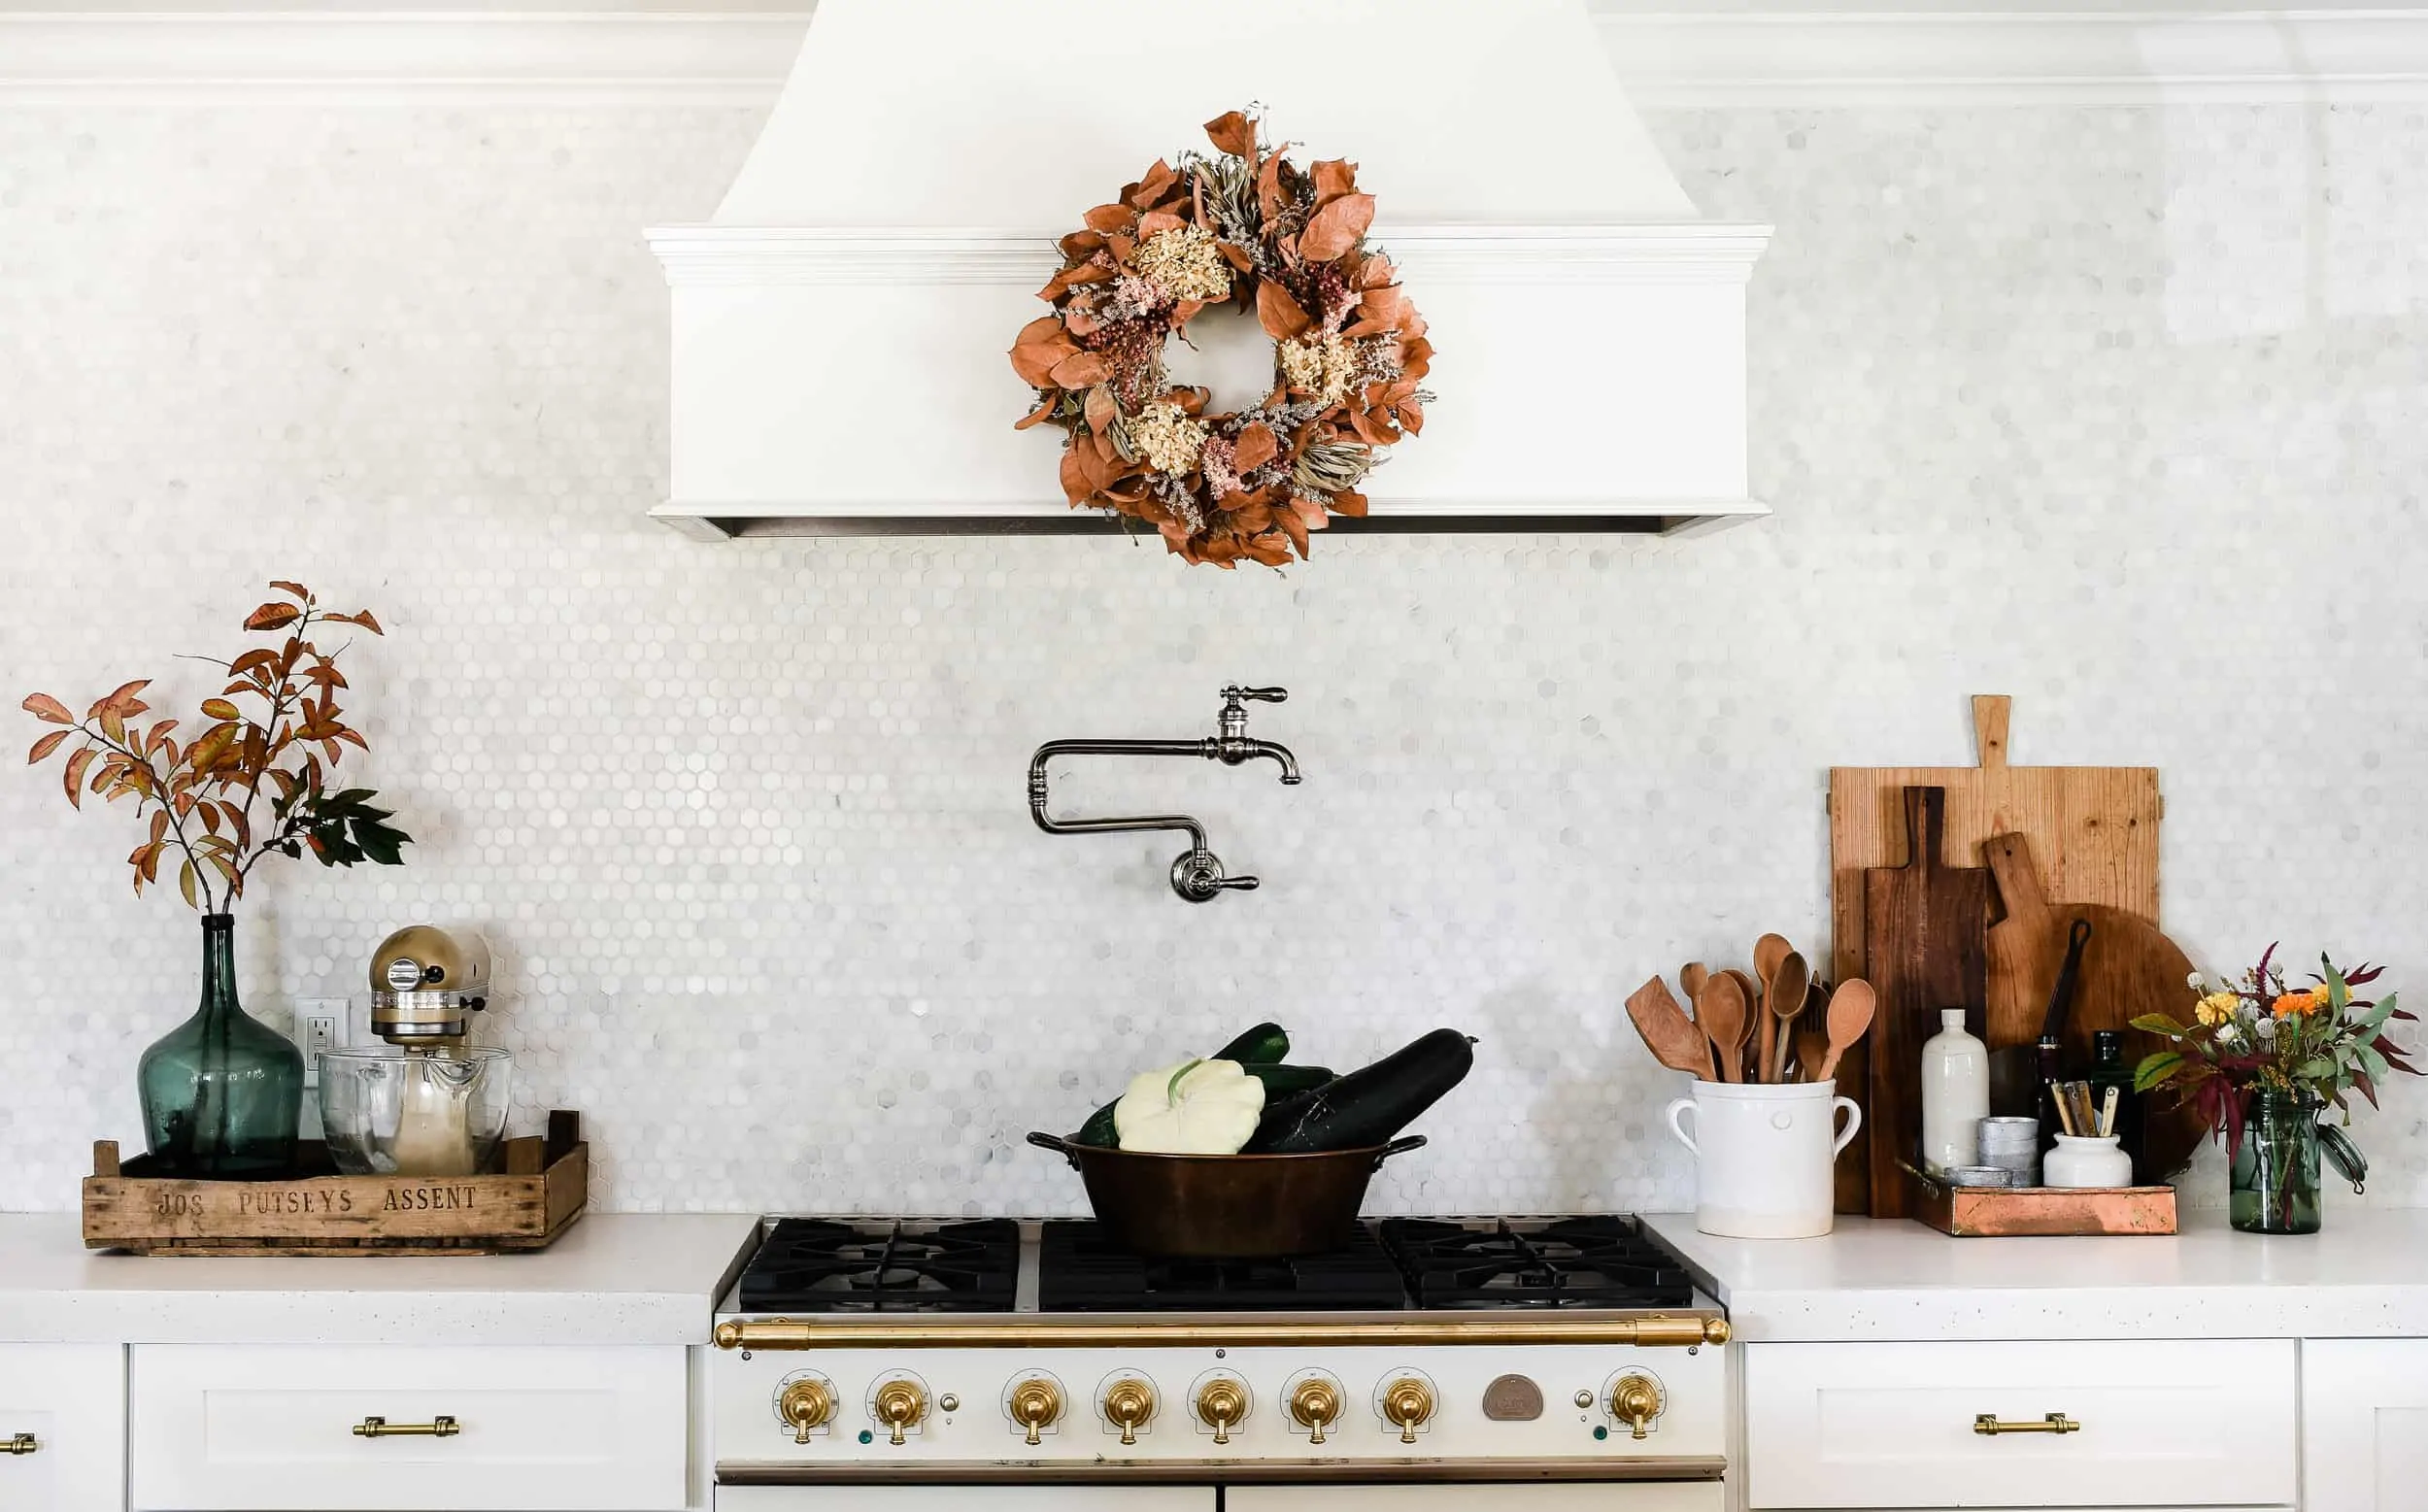 Get inspired to decorate this season with fall decorating ideas from these sixteen beautiful kitchens!